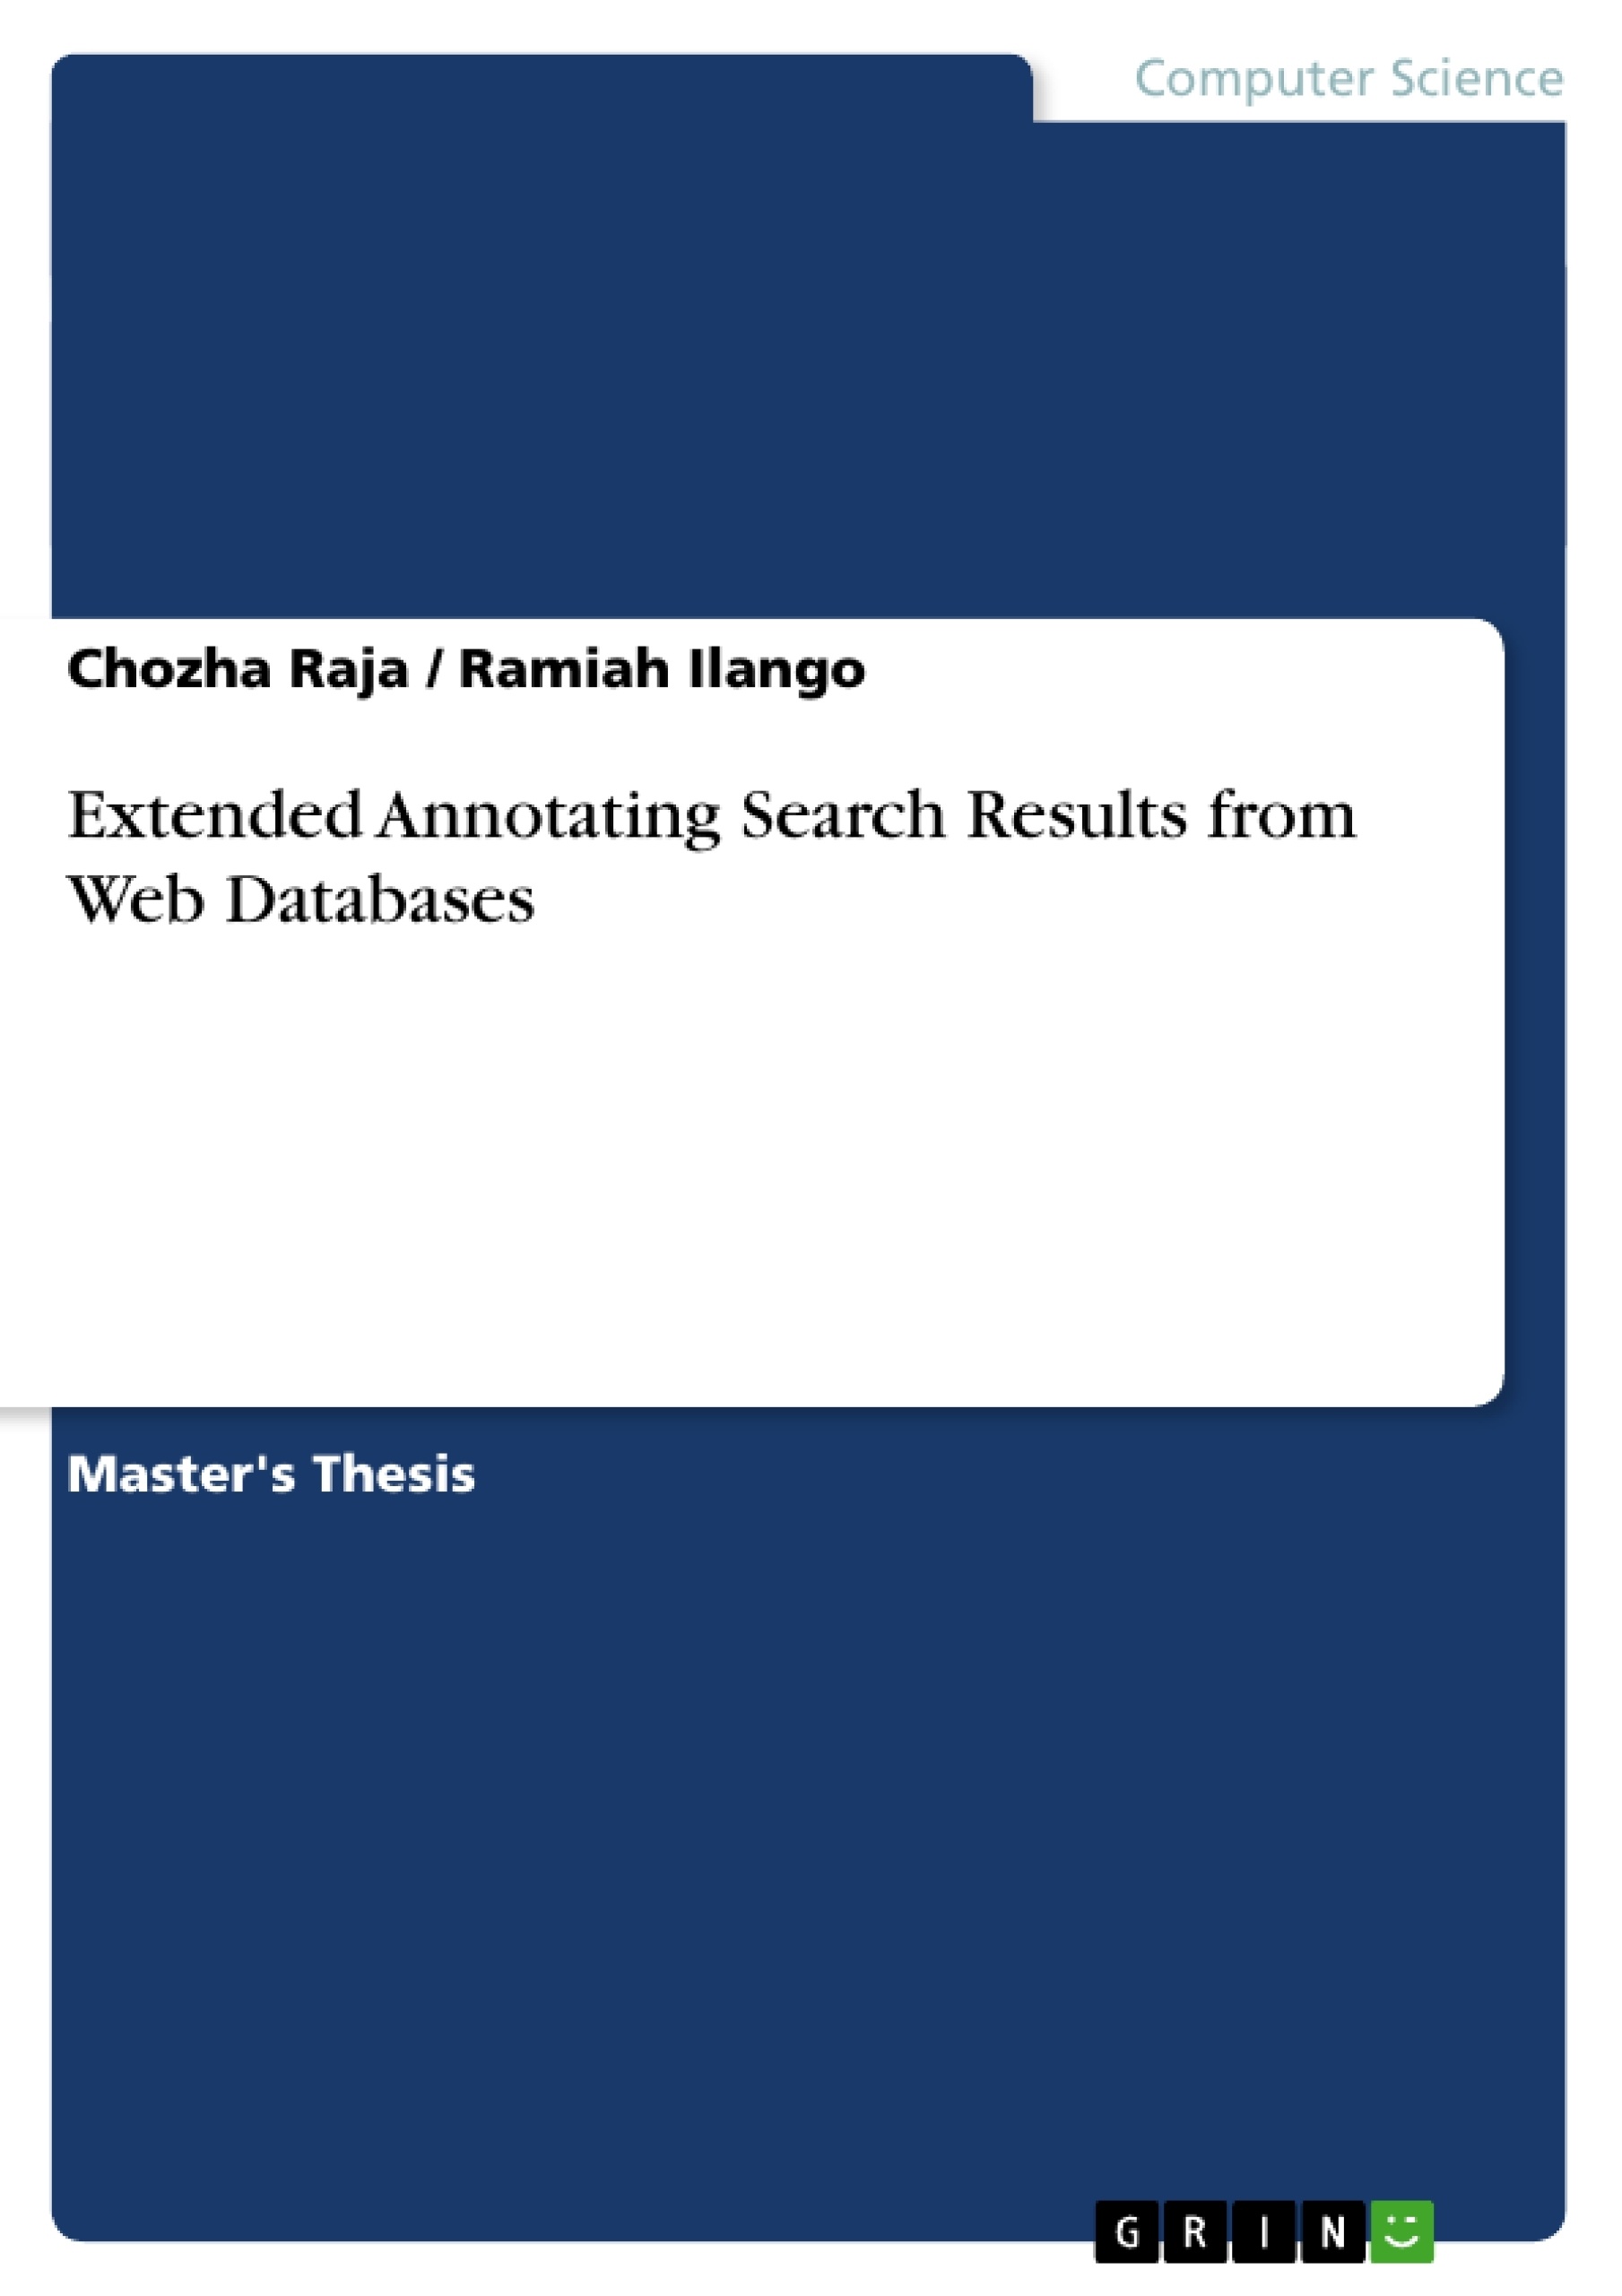 Title: Extended Annotating Search Results from Web Databases